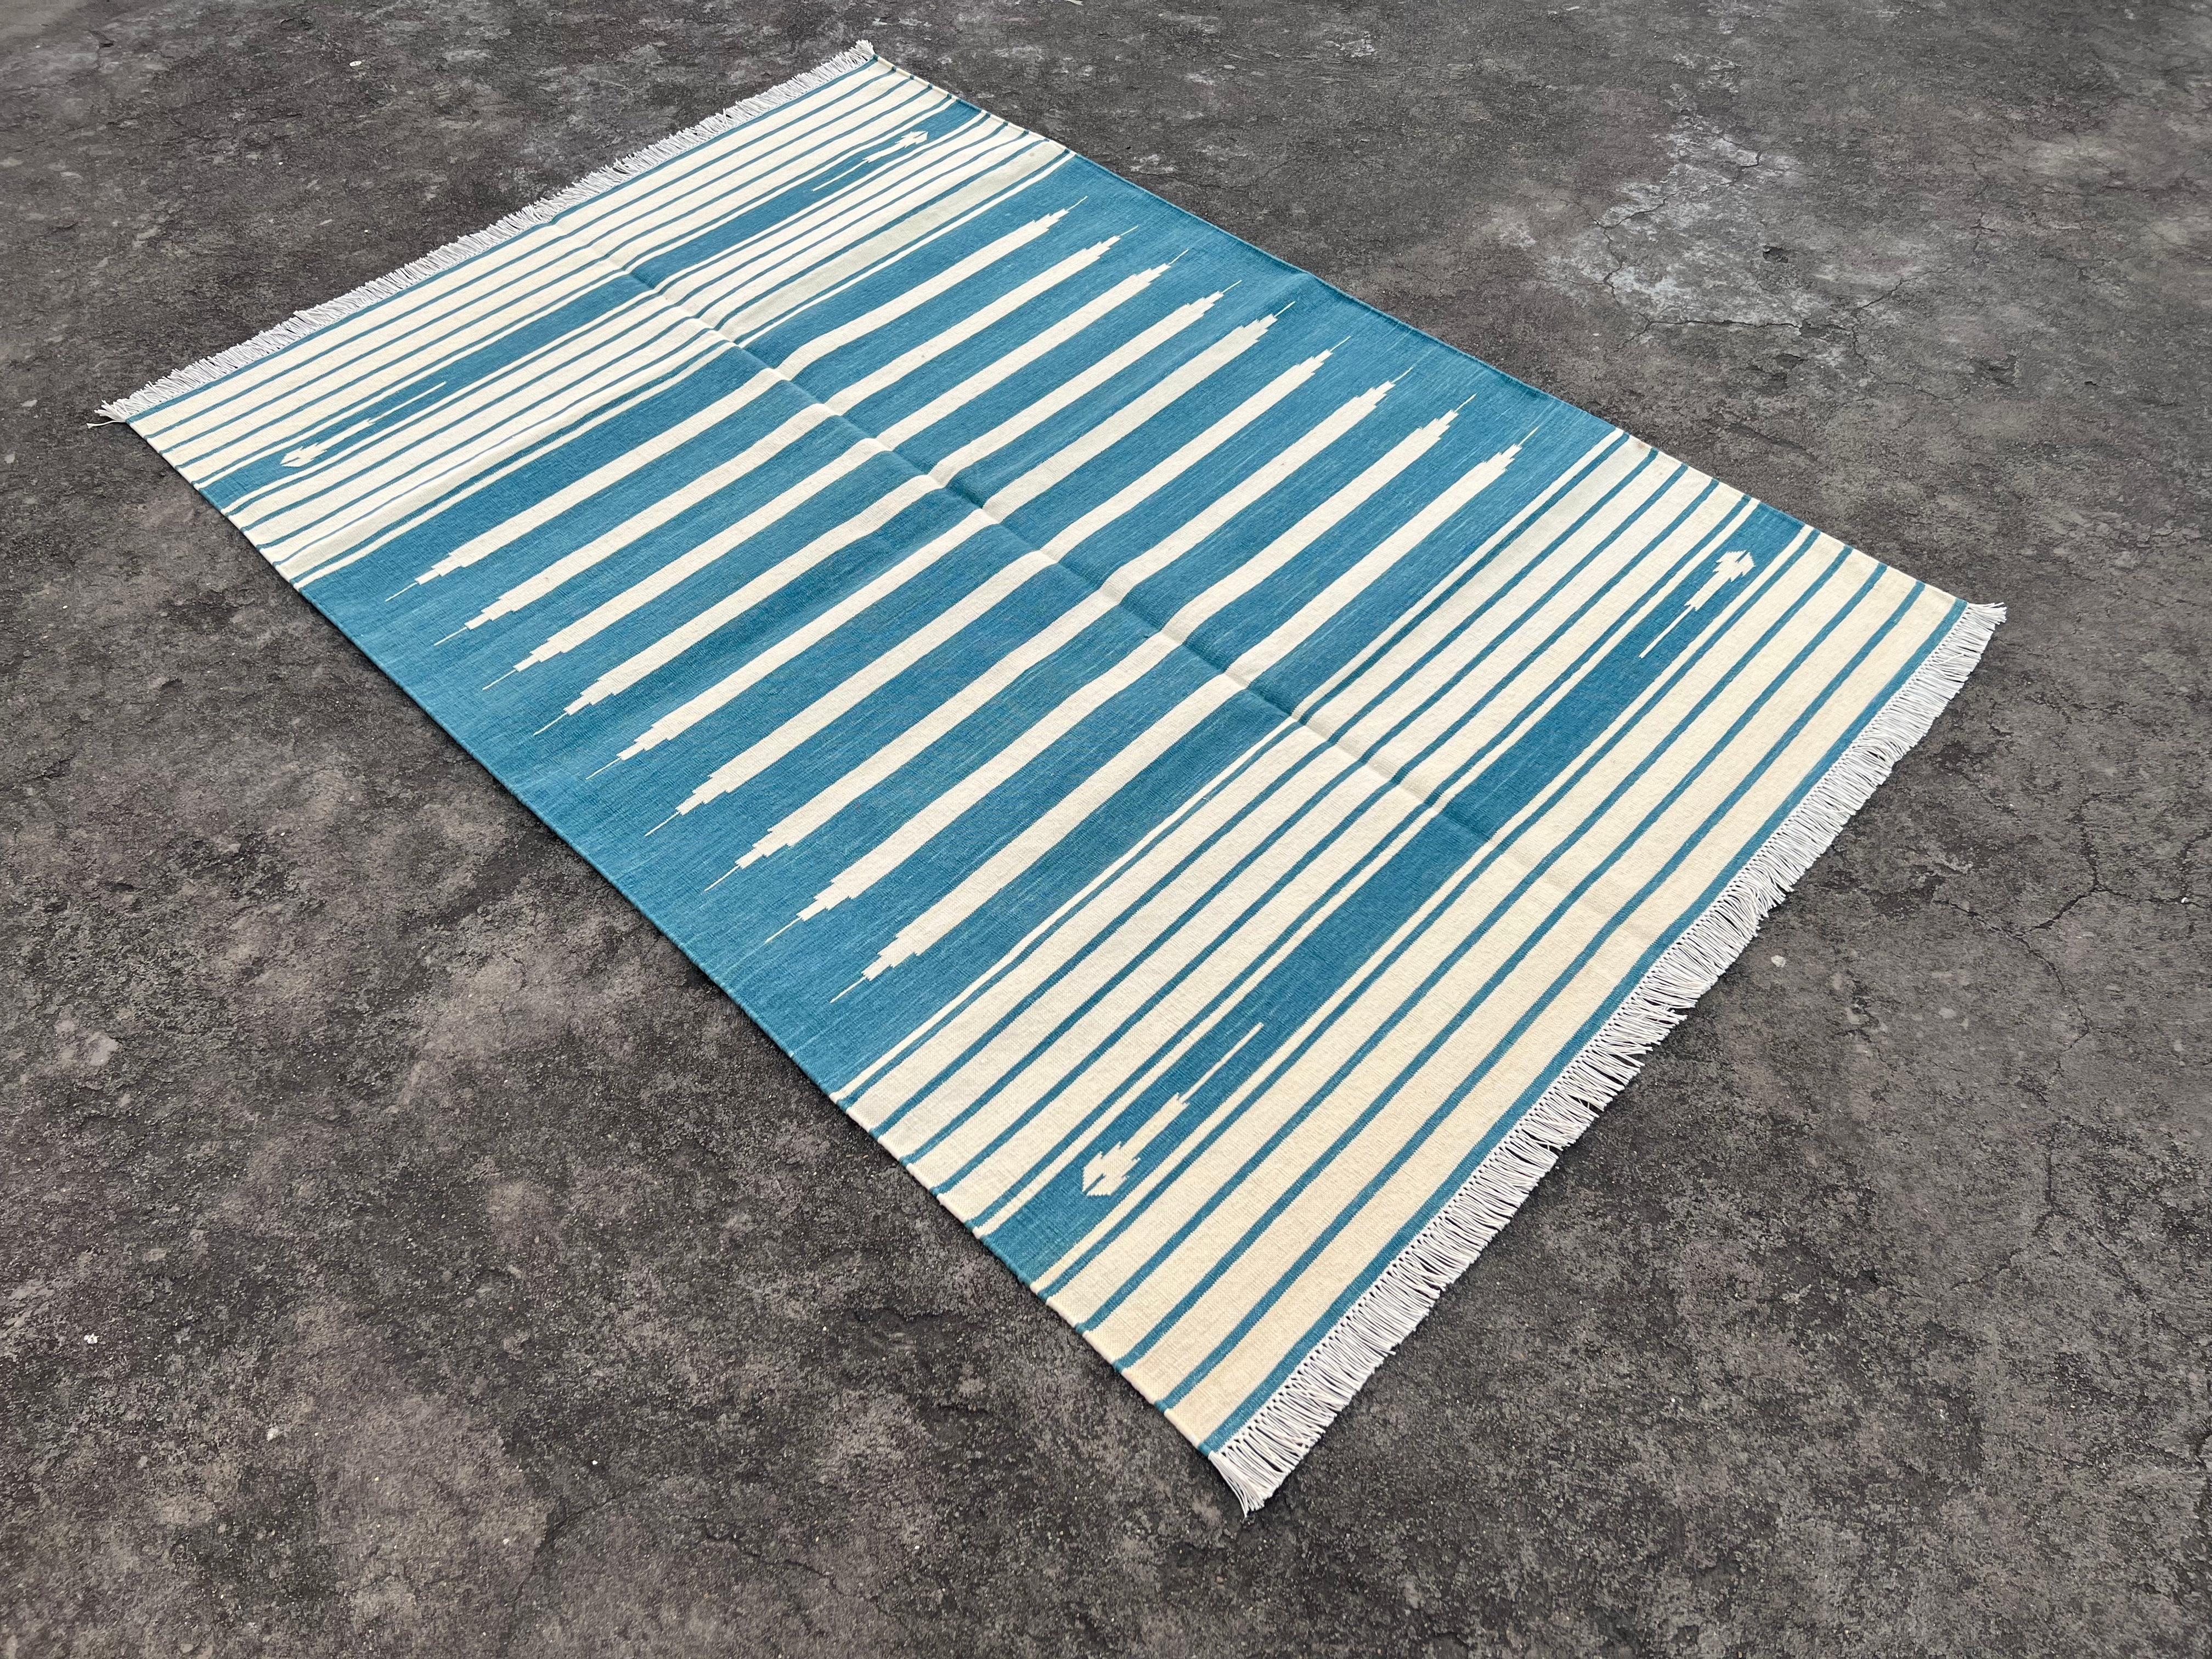 Cotton Vegetable Dyed Cream And Teal Blue Striped Indian Dhurrie Rug-4'x6' 

These special flat-weave dhurries are hand-woven with 15 ply 100% cotton yarn. Due to the special manufacturing techniques used to create our rugs, the size and color of